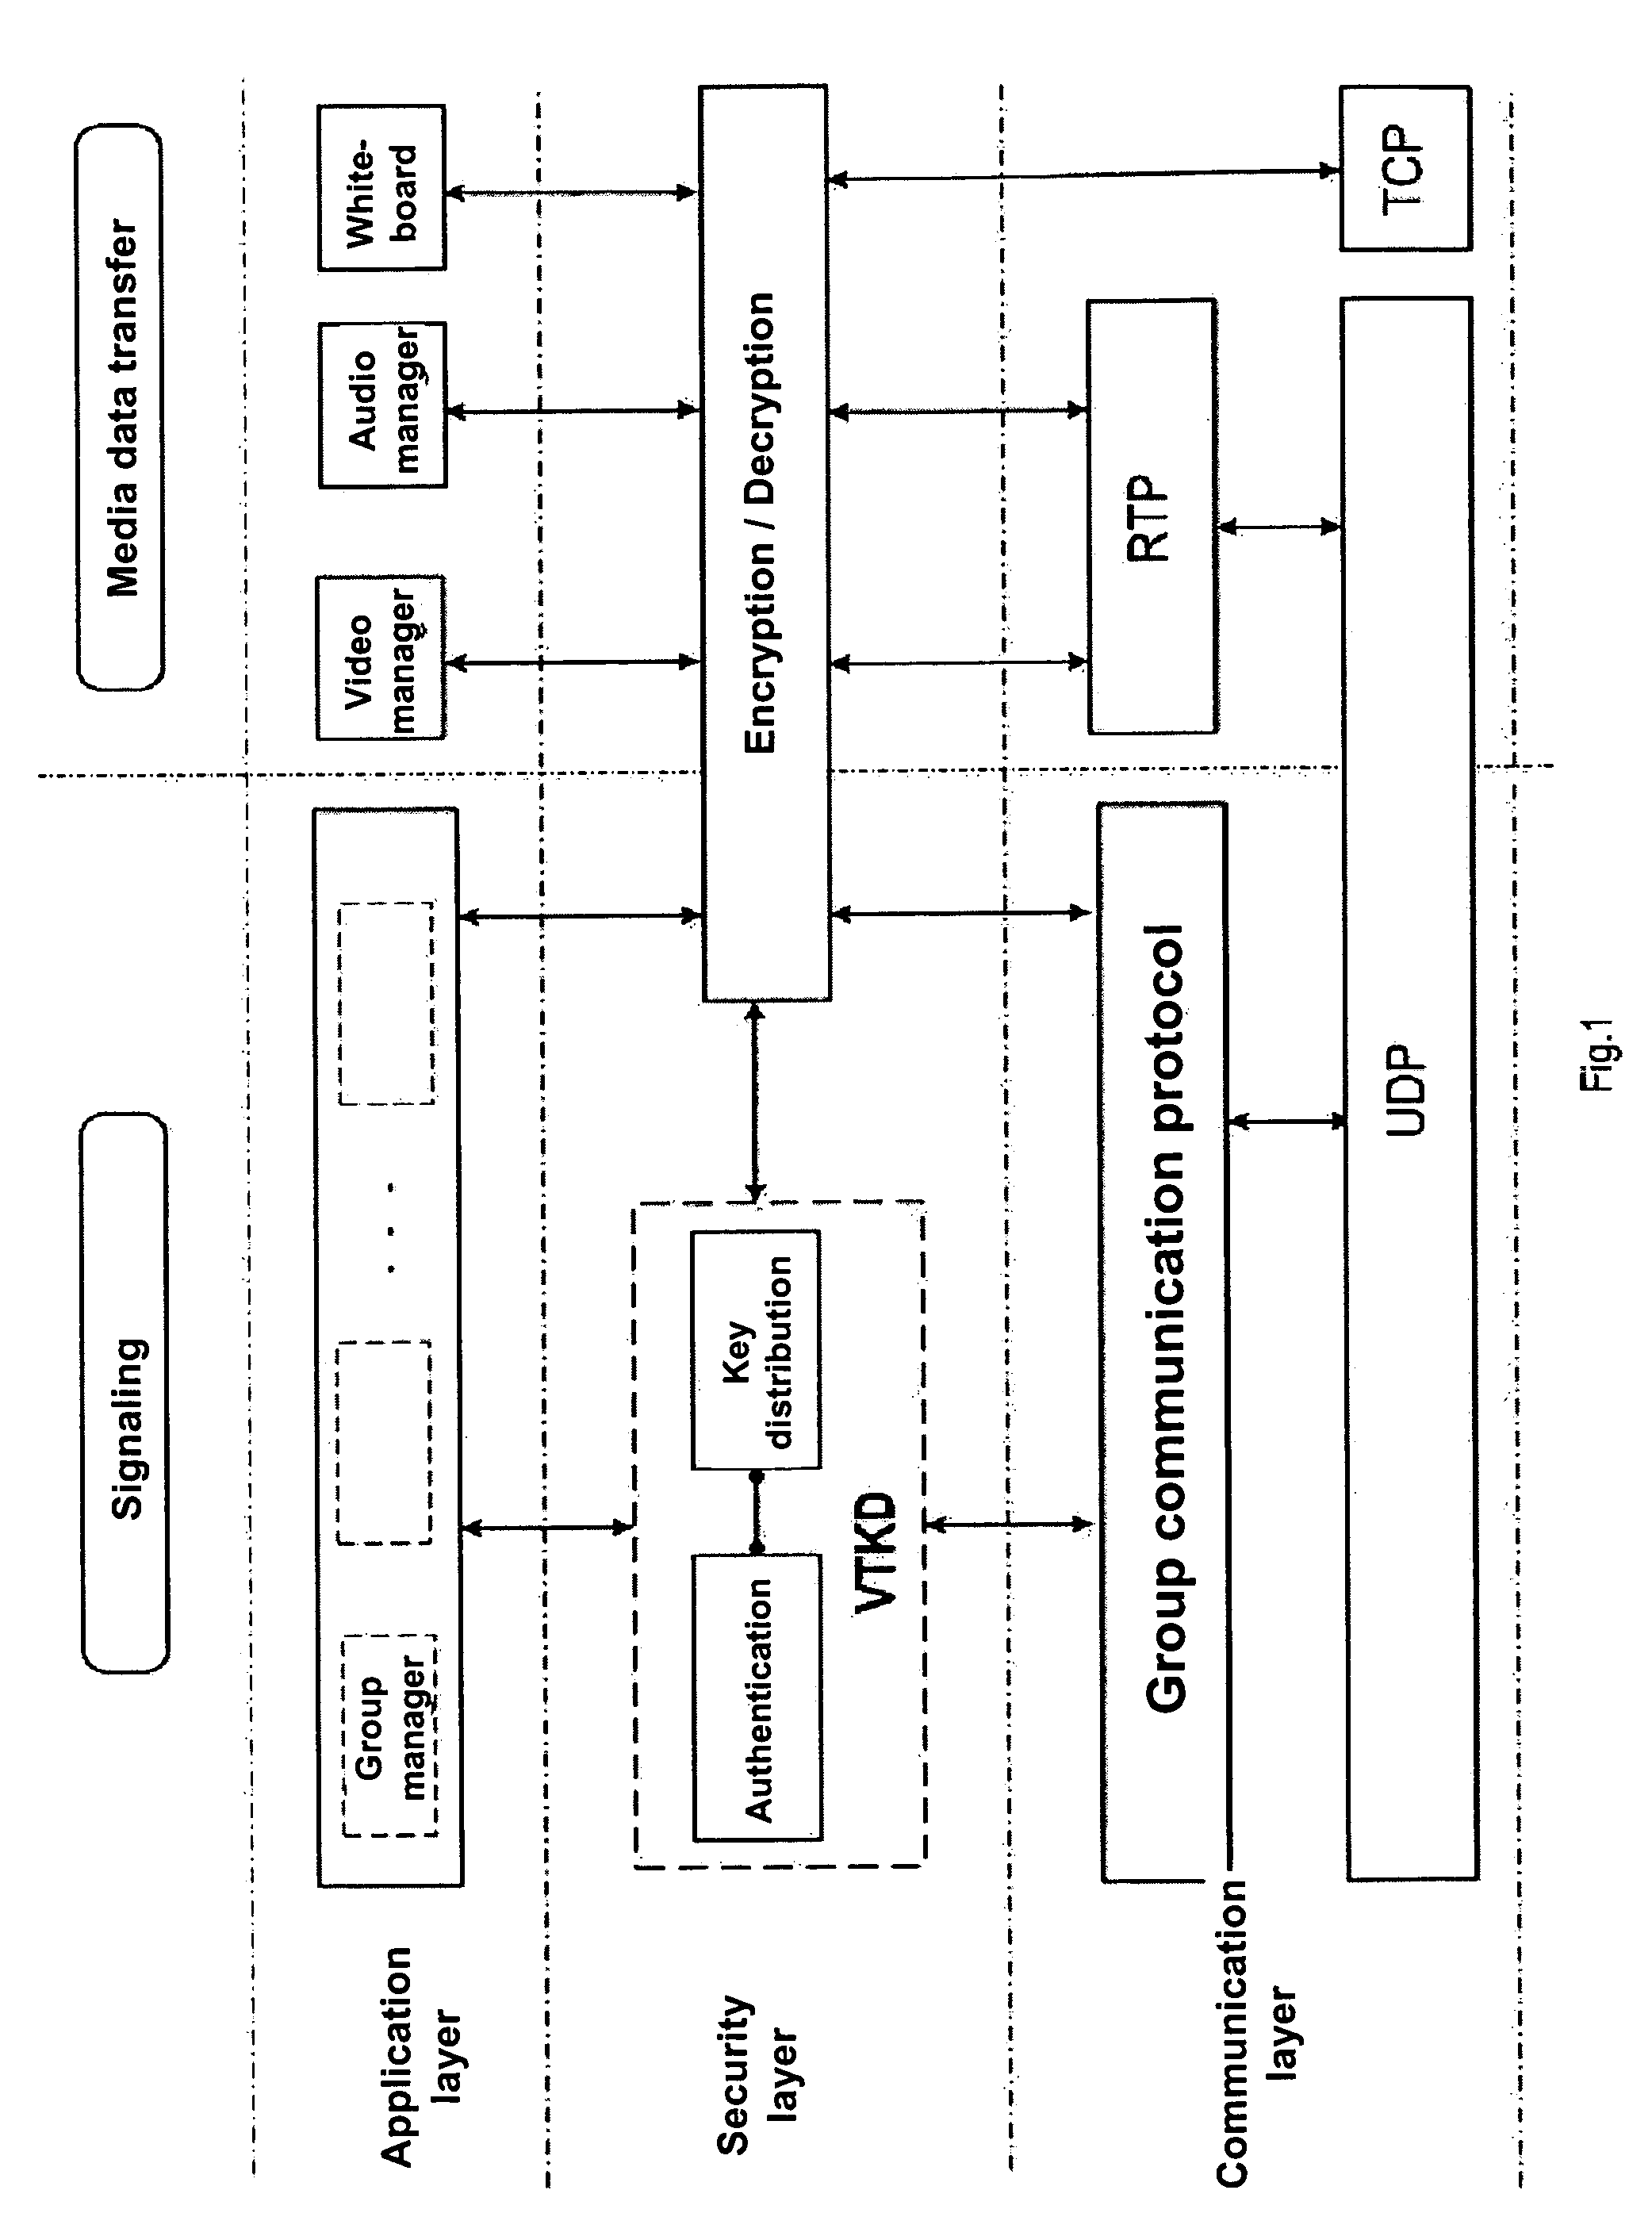 Method for changing a group key in a group of network elements in a network system